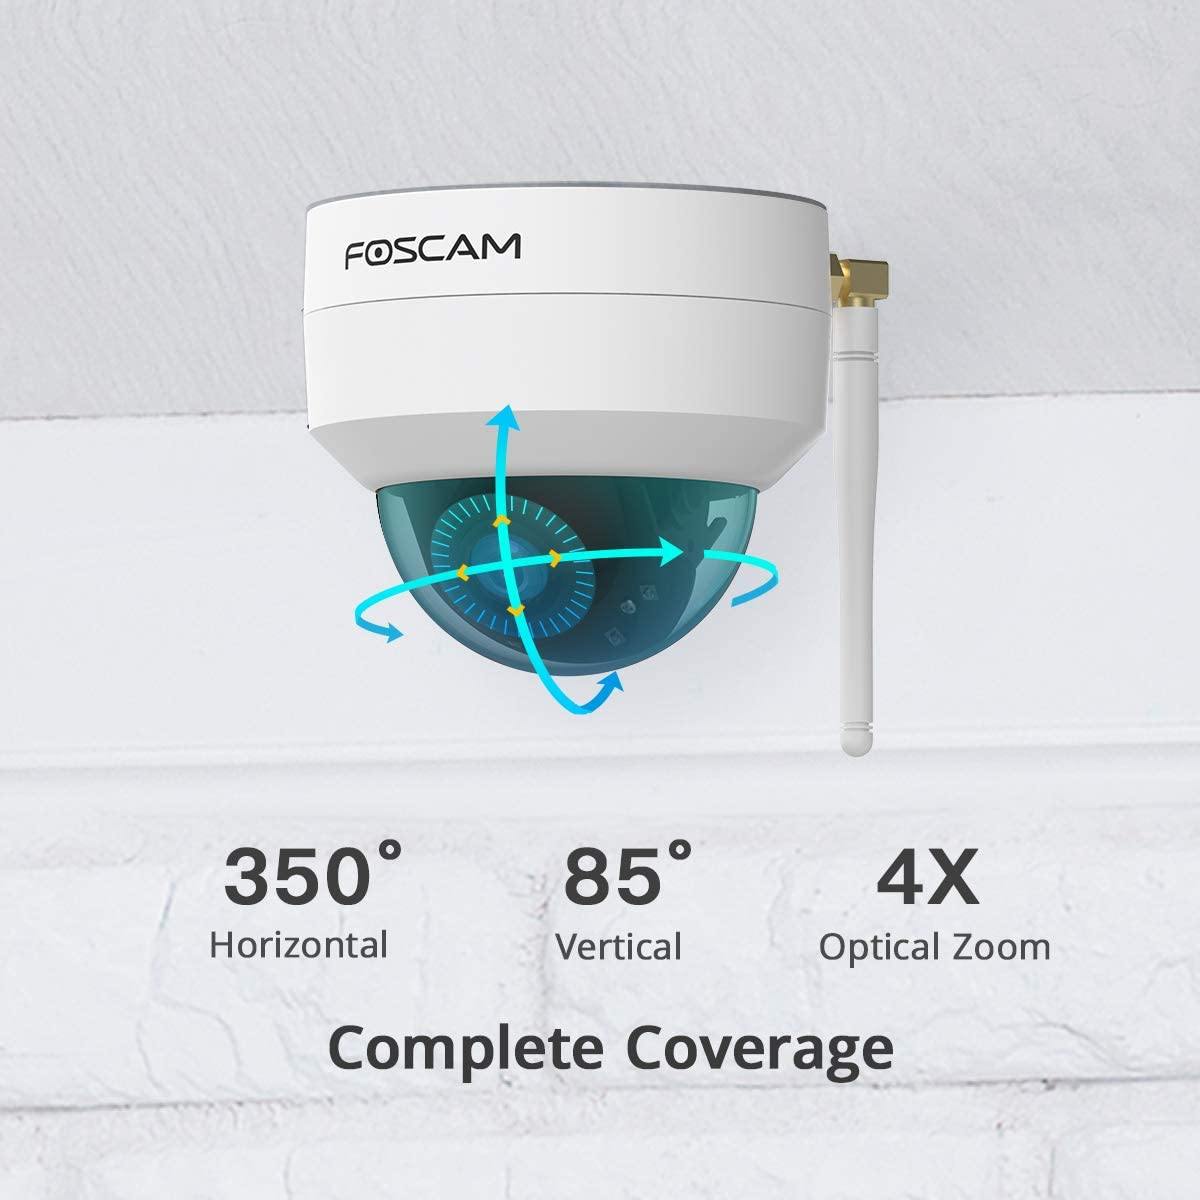 4MP Outdoor Security WiFi Camera, FOSCAM 4X Optical Zoom PT Surveillance Dome Camera, Supports 2.4G/5G Dual-Band WiFi Connection, 66ft Night Vision